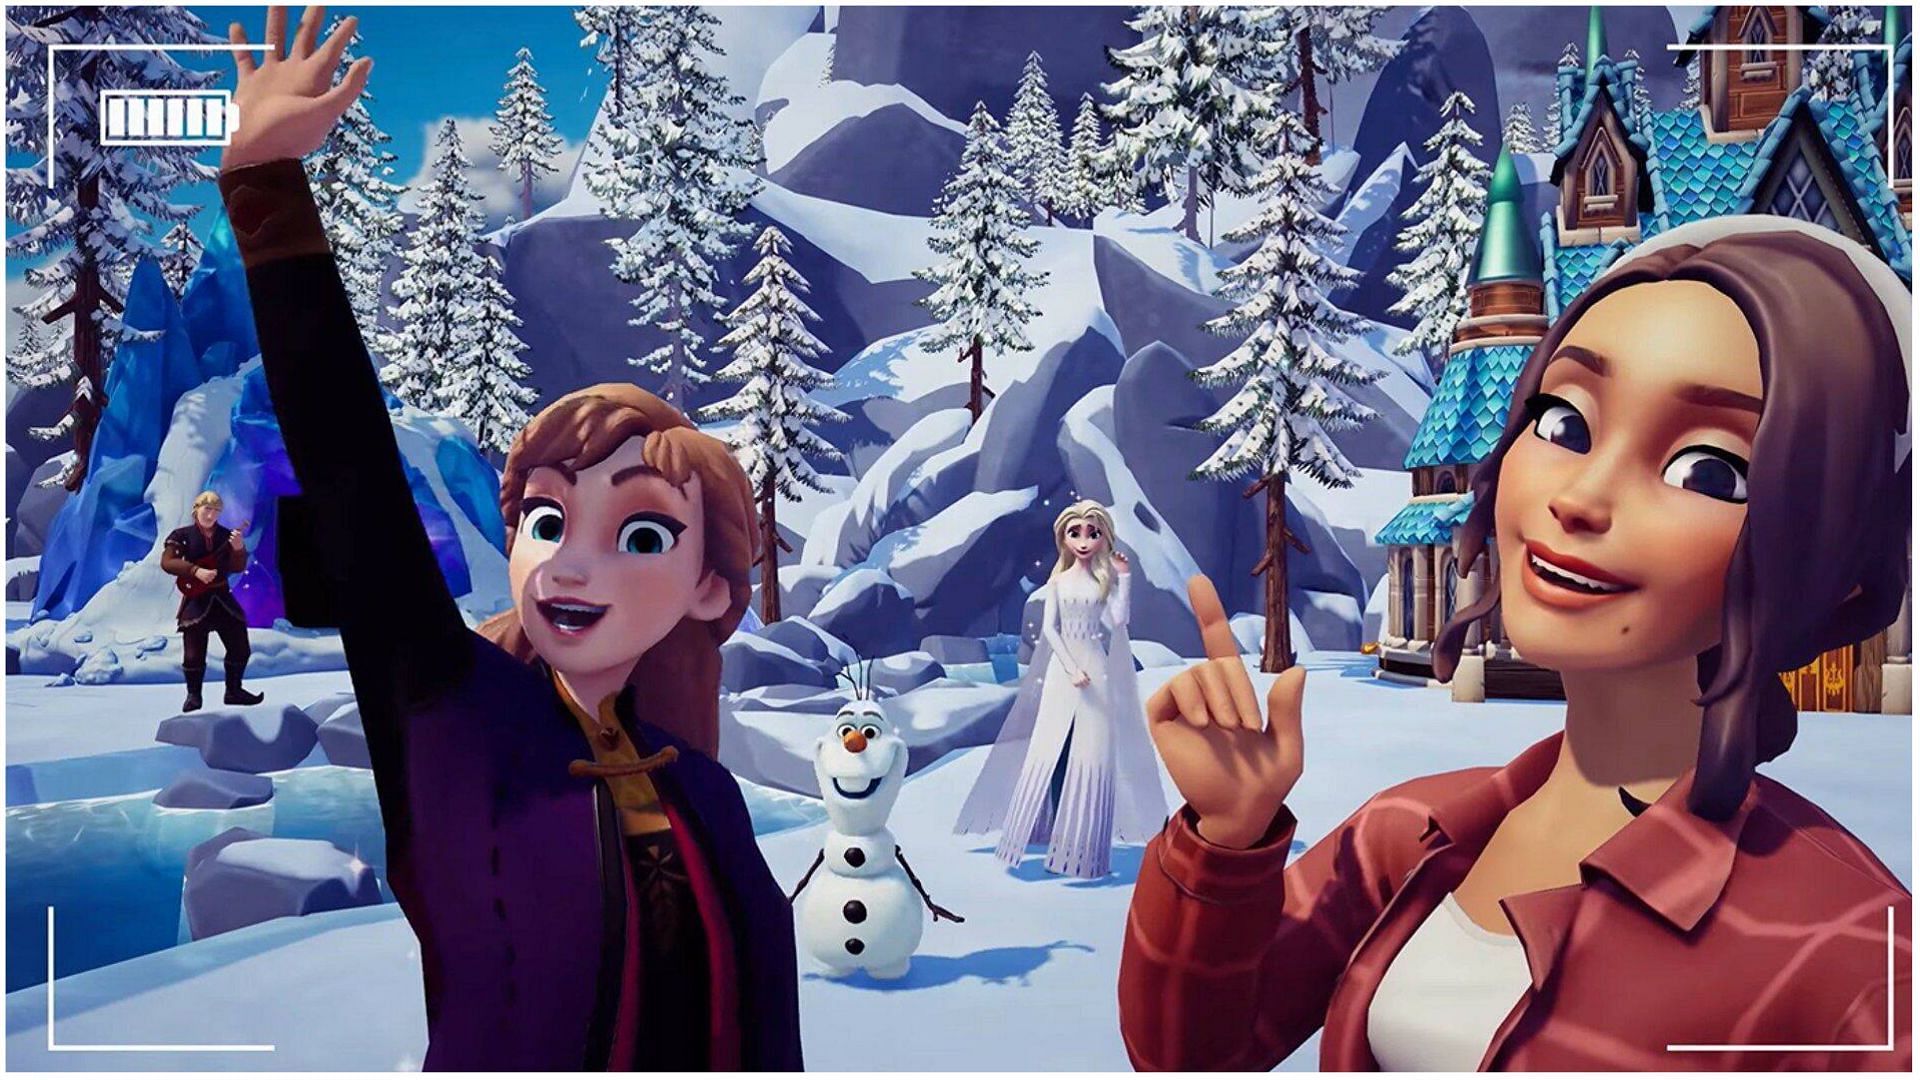 The cast of Frozen are just some of the characters you can meet in Disney Dreamlight Valley (Image via Gameloft)